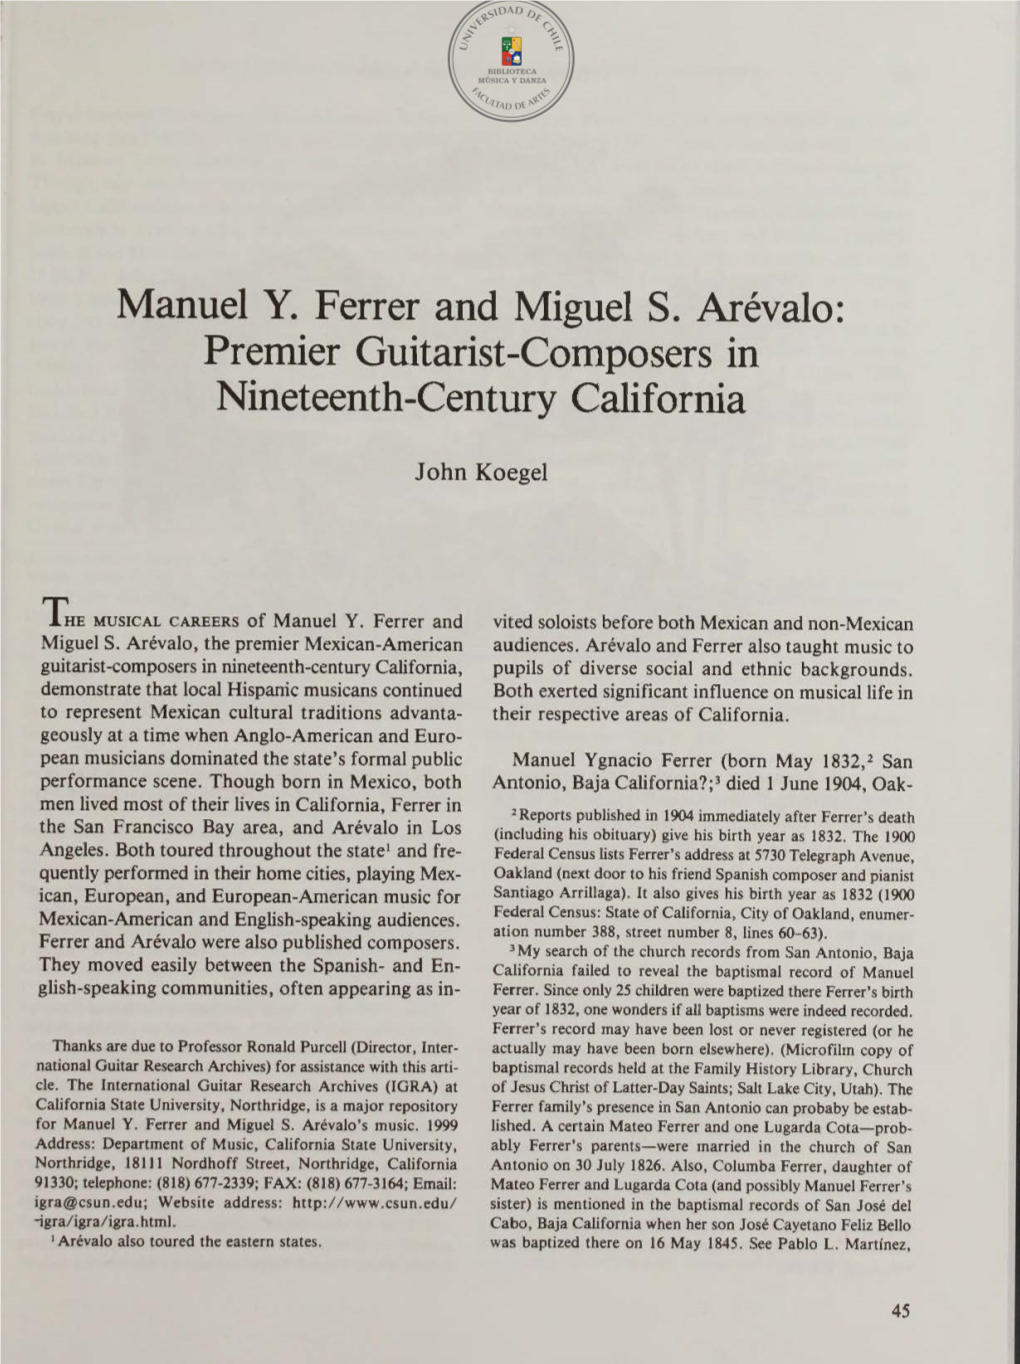 Manuel Y. Ferrer and Miguel S. Arévalo: Premier Guitarist-Composers in Nineteenth-Century California